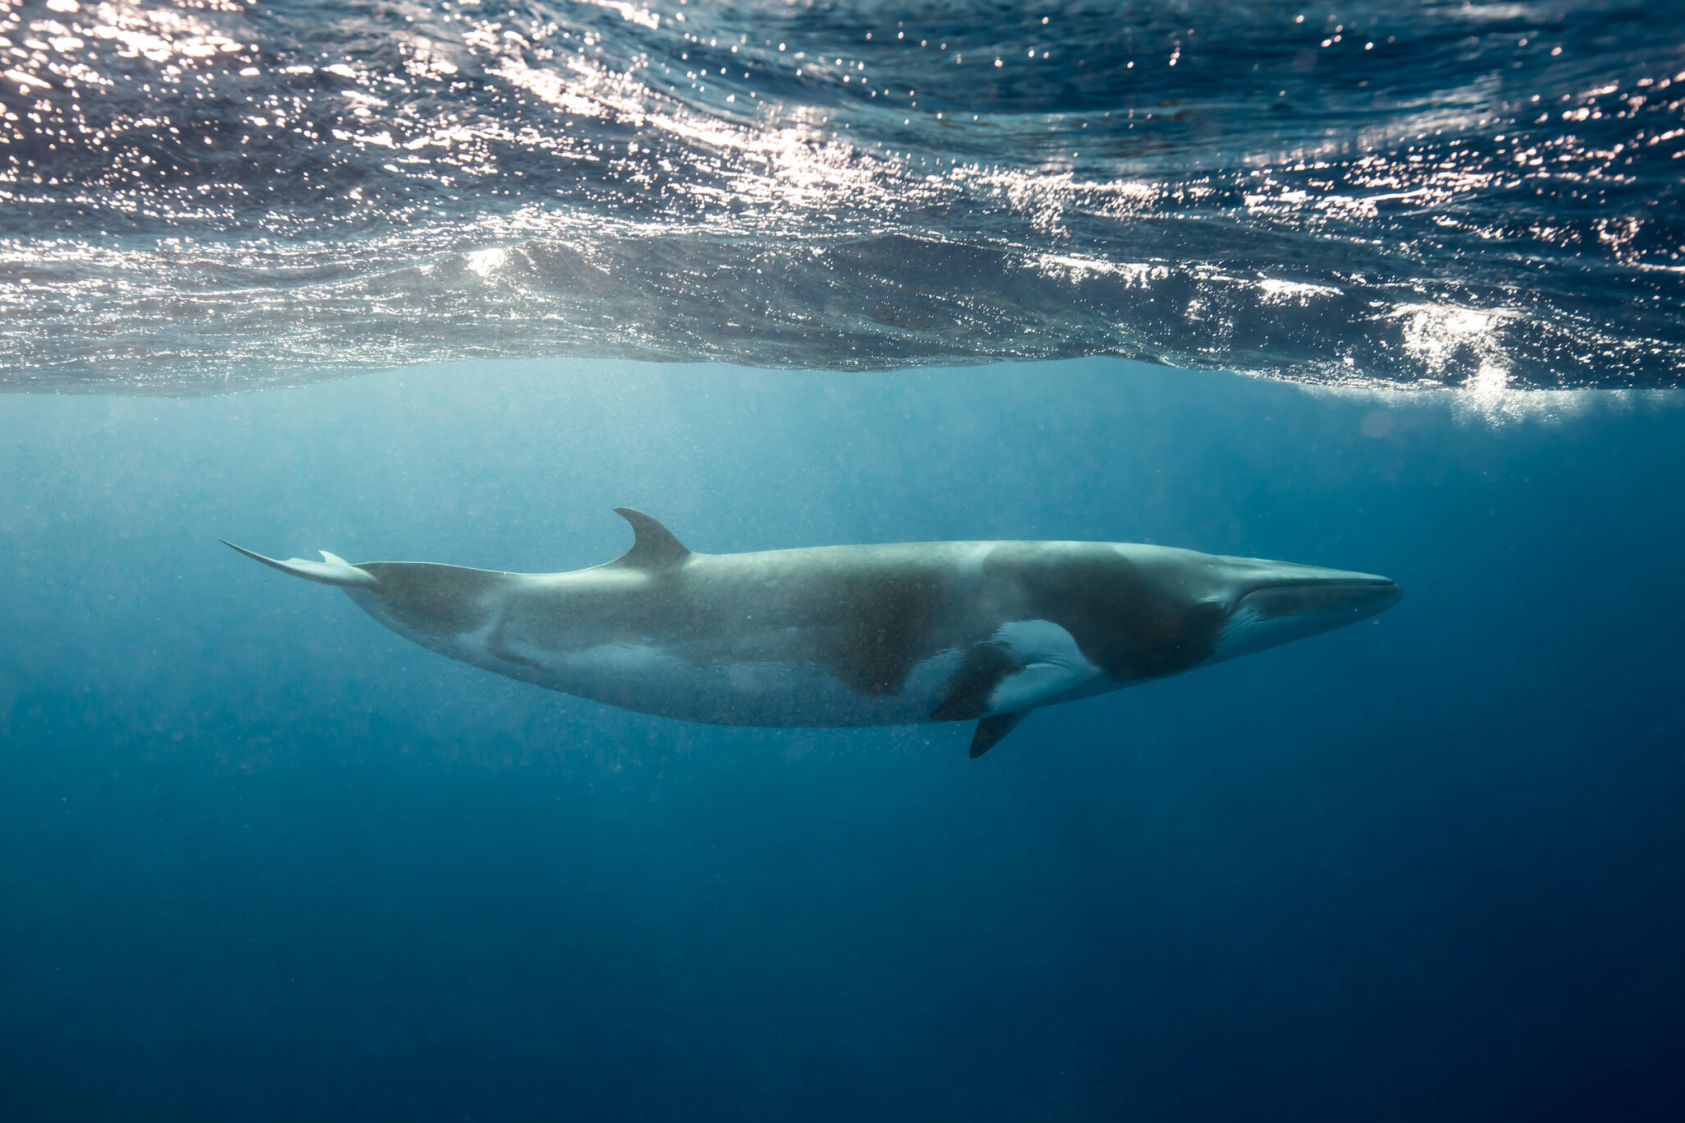 Image of a minke whale swimming in the ocean